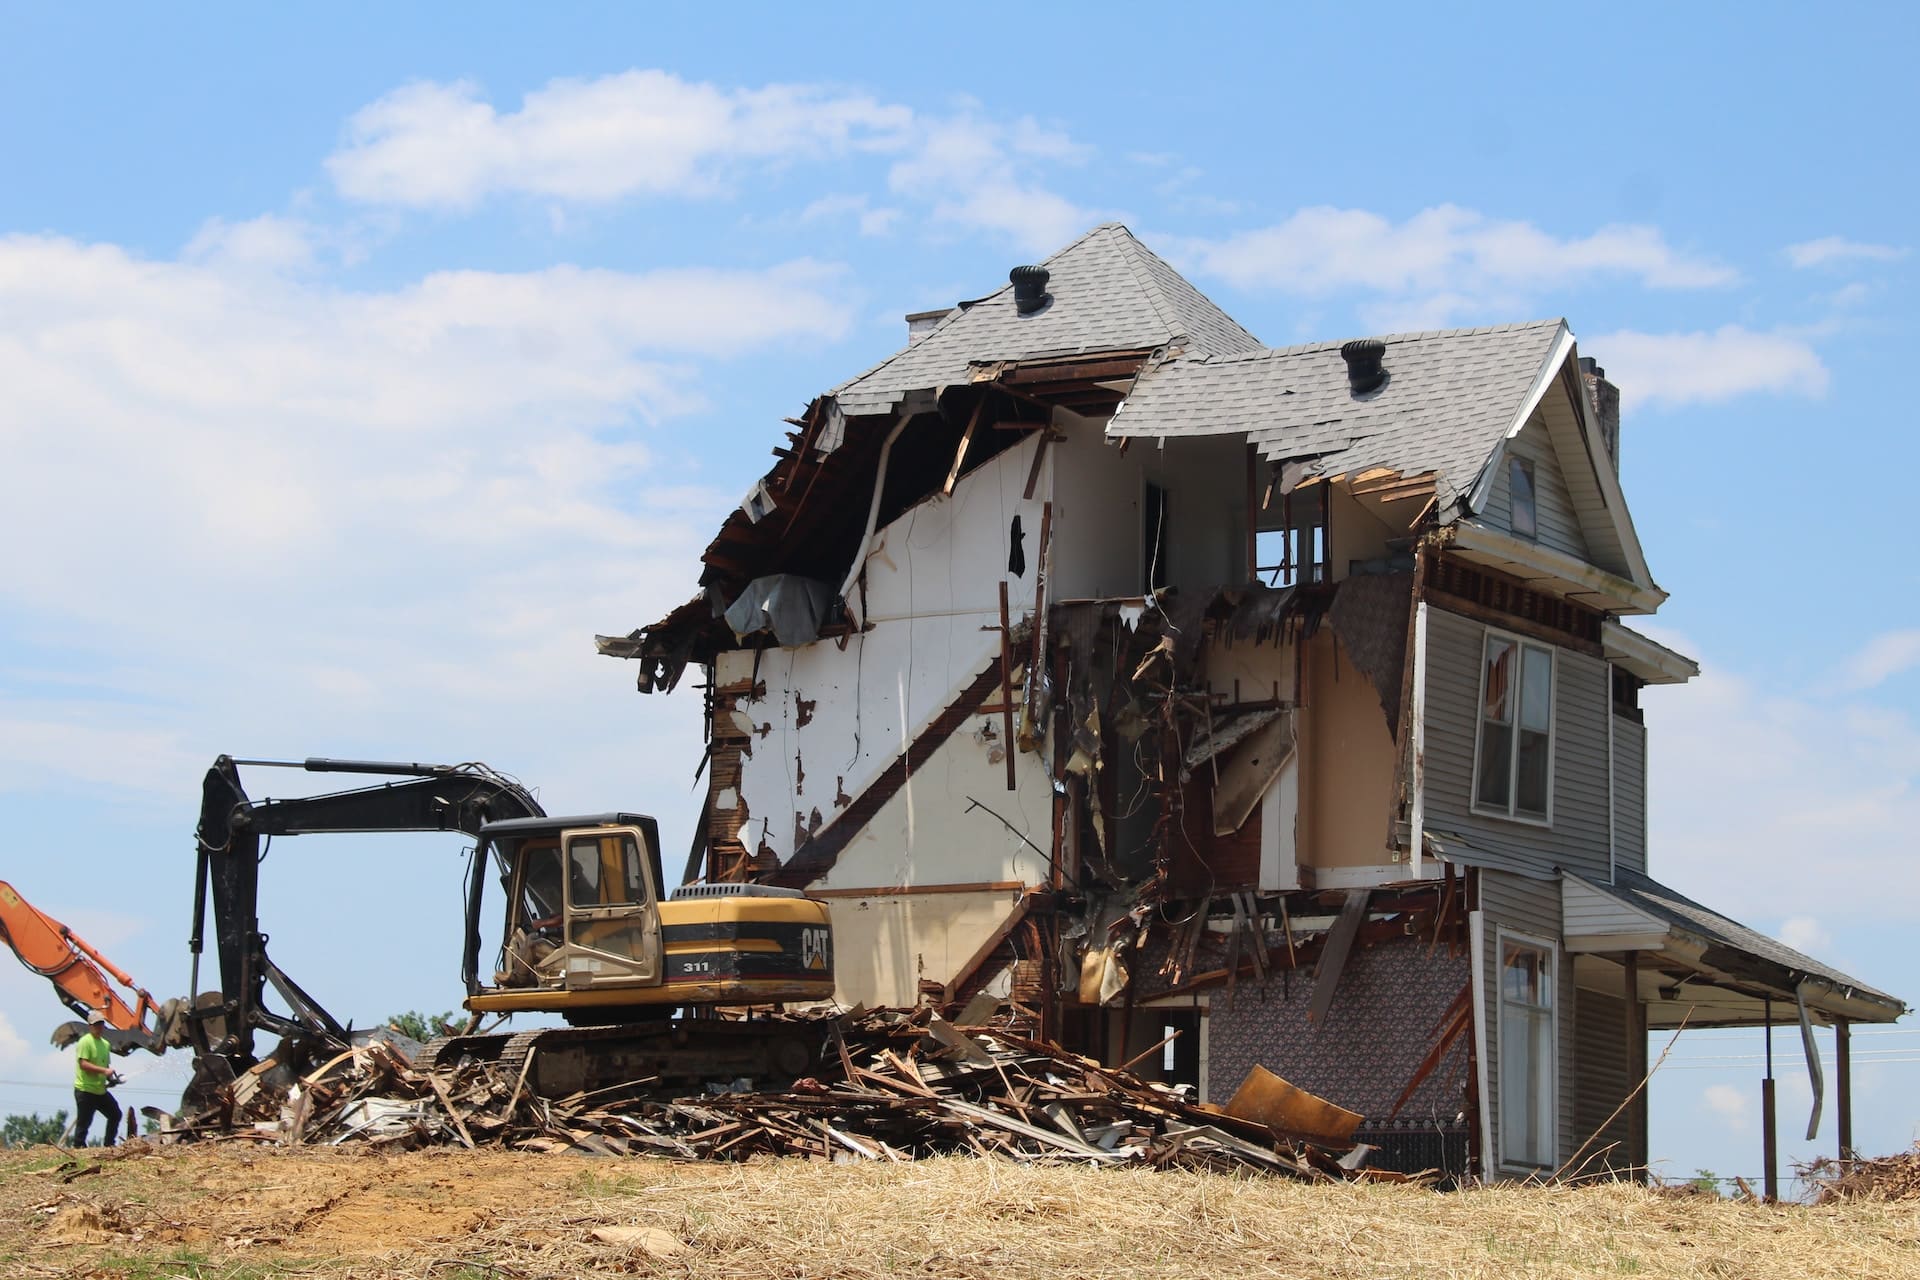 The Questions You Should Ask a Demolition Contractor Before Hiring Them